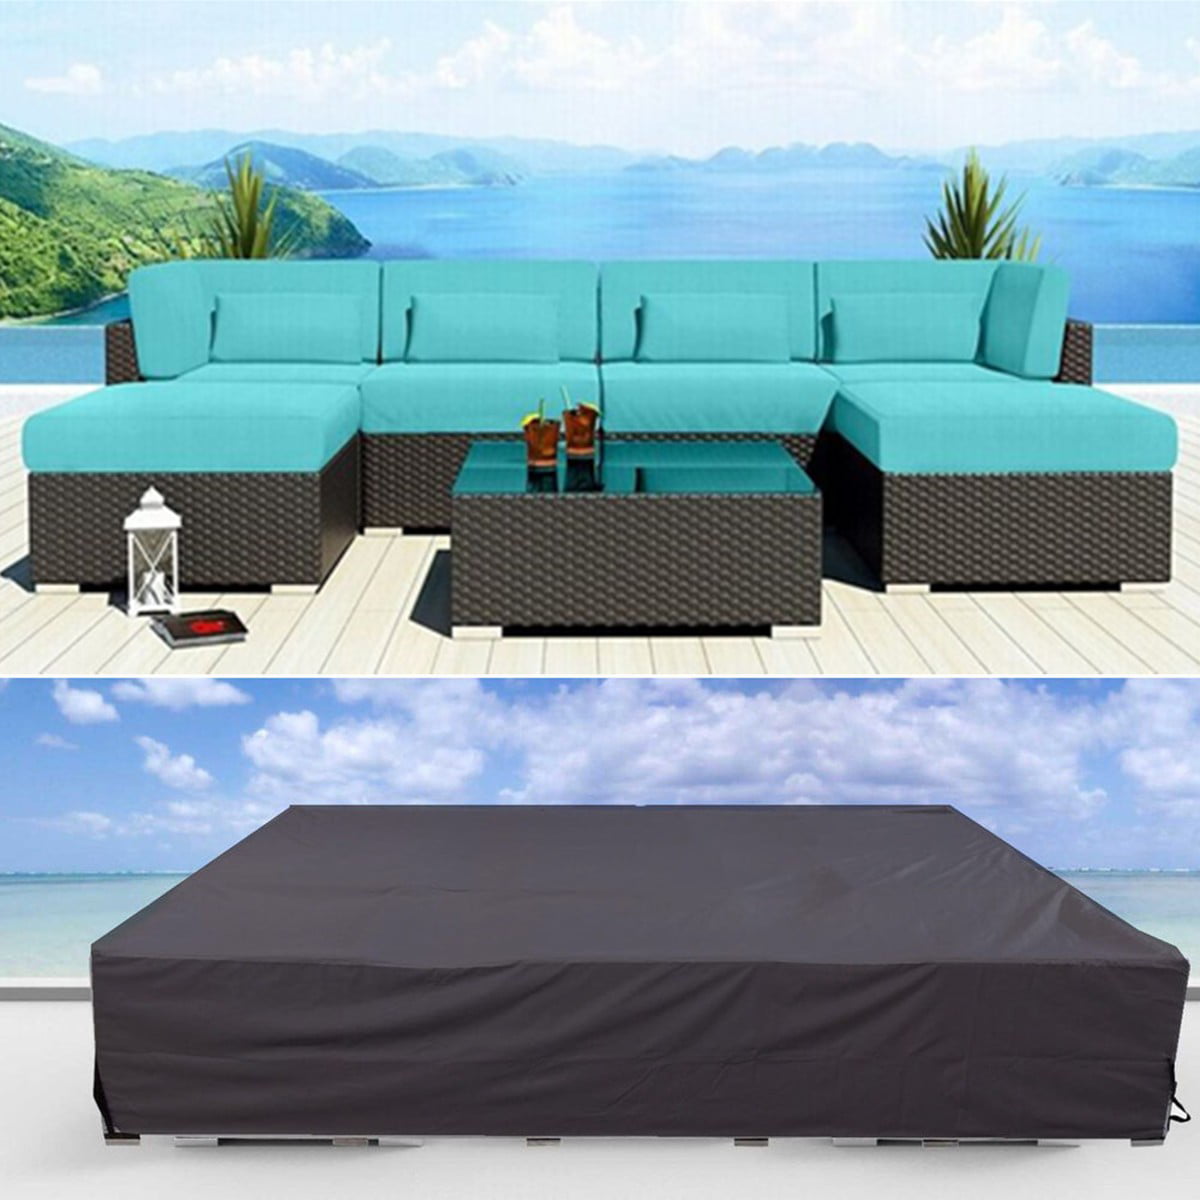 All-Seasons Outdoor Loveseat Wicker Chairs Waterproof Cover Furniture Protection 